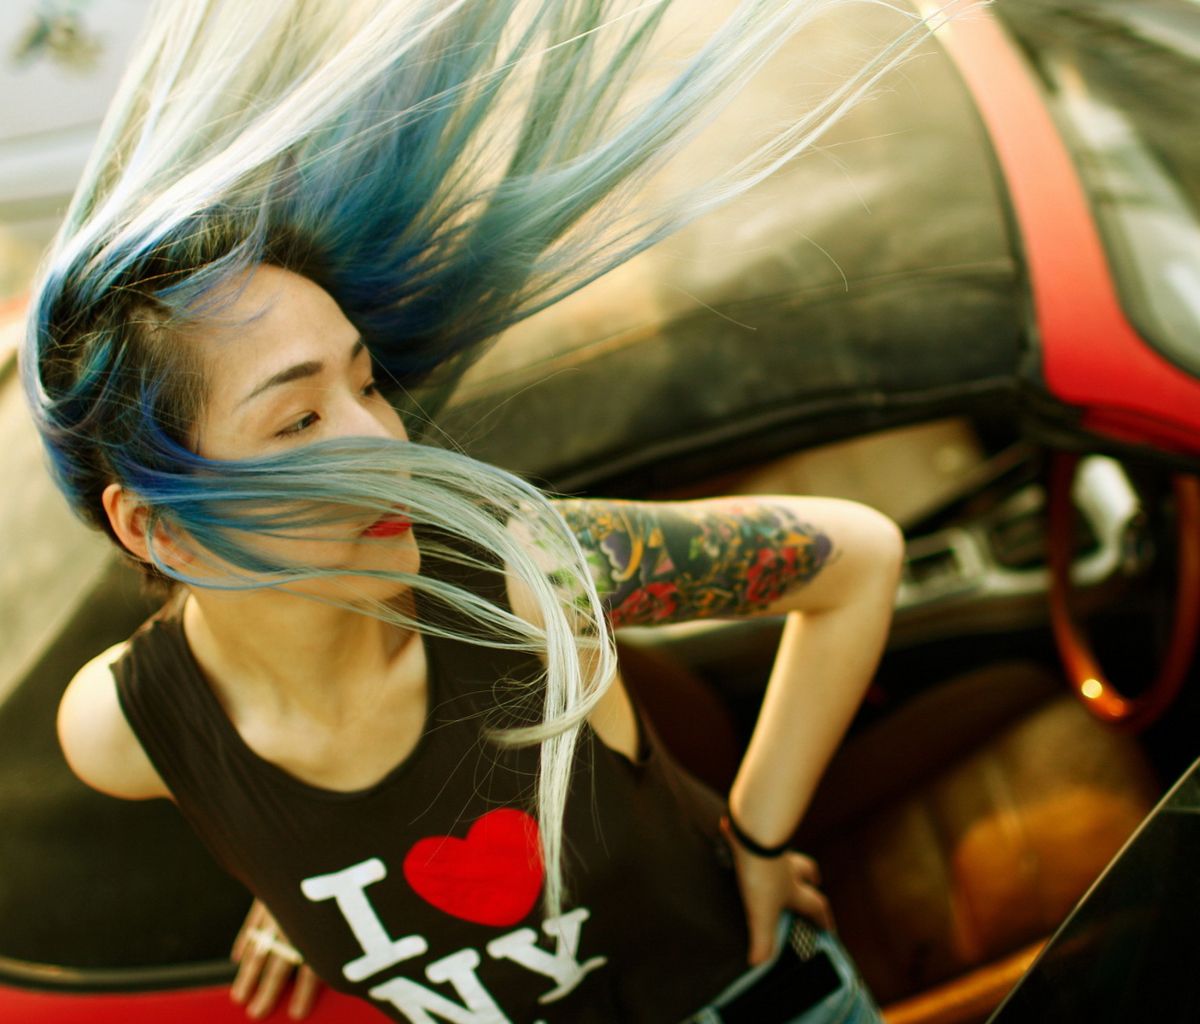 Cool Asian Girl With Blue Hair & I Love NY T-shirt wallpaper 1200x1024